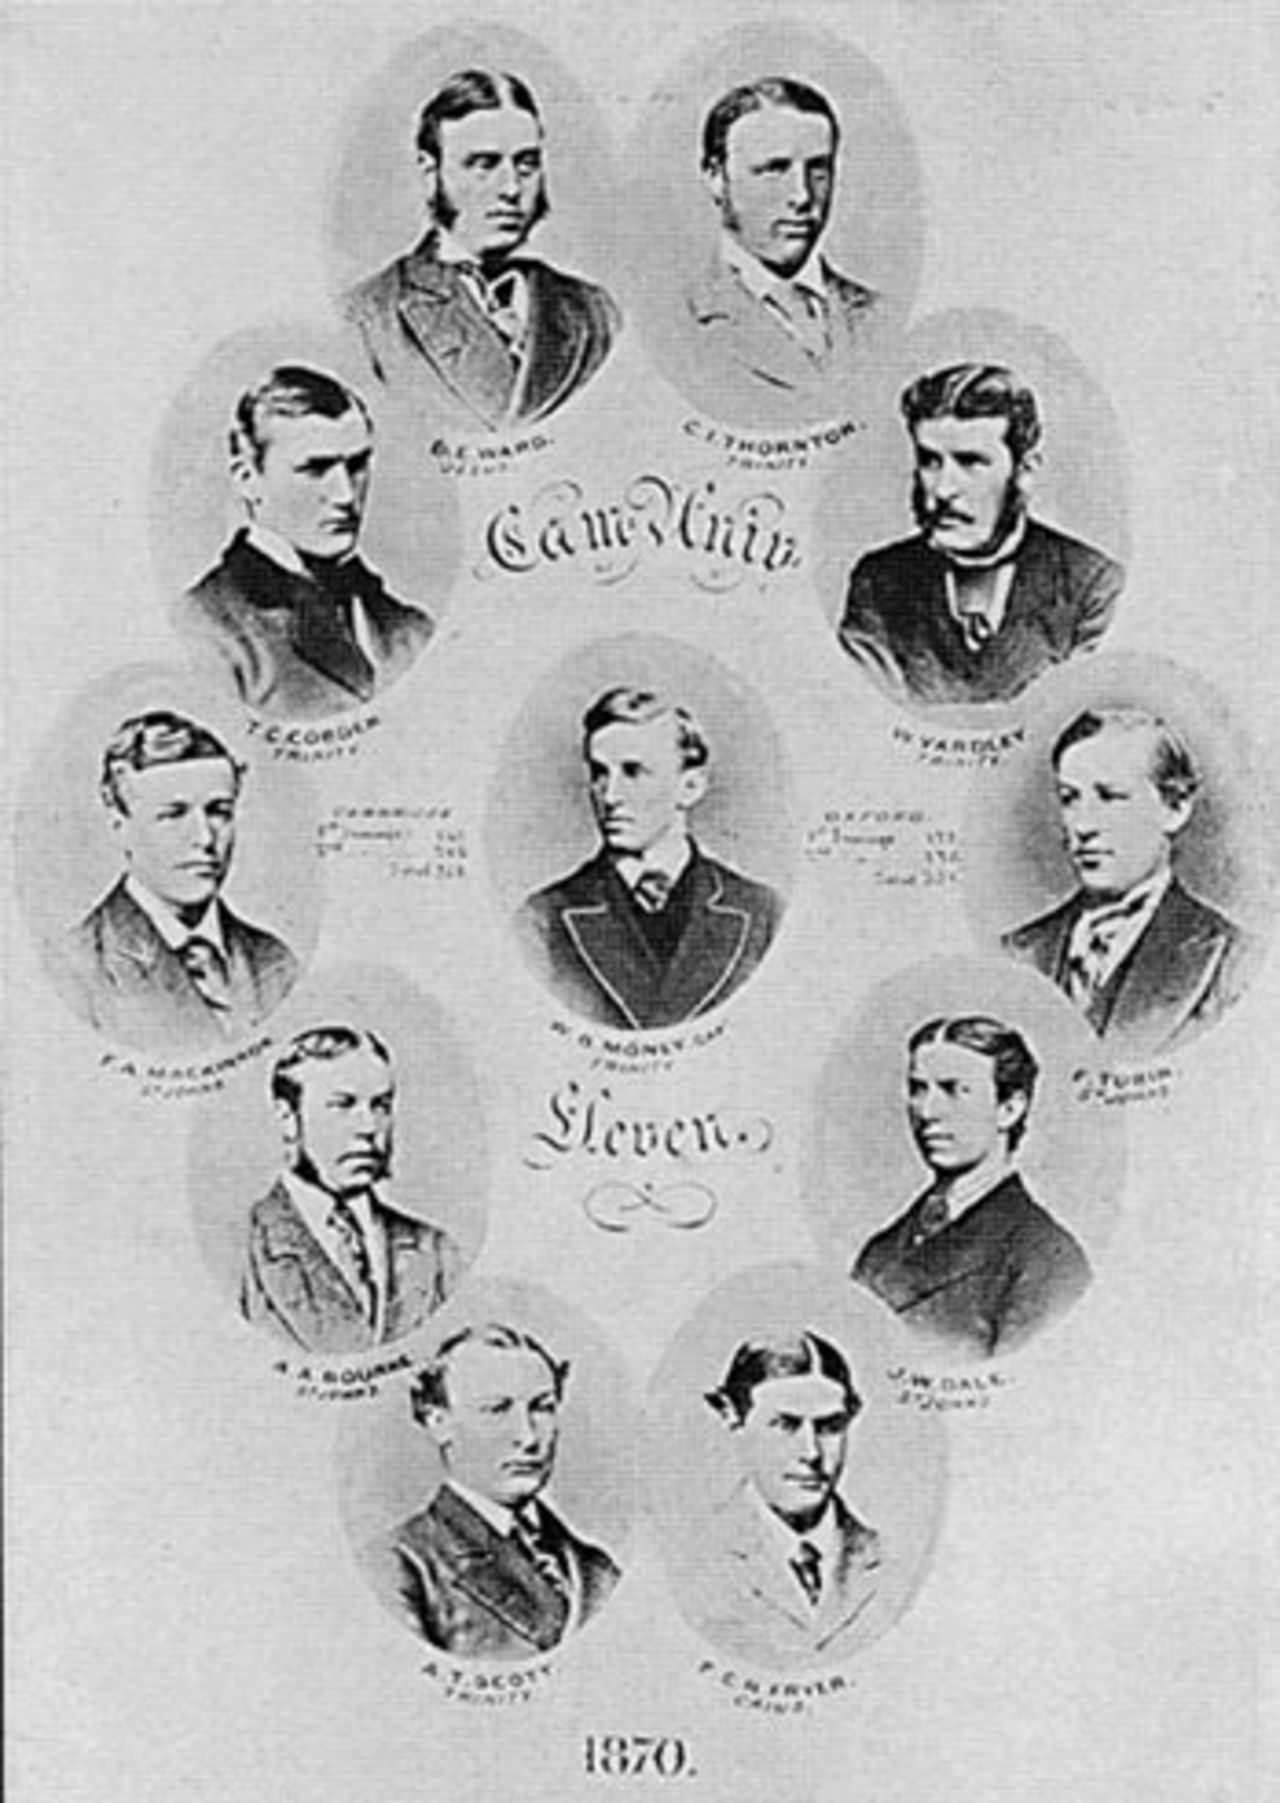 Cambridge University XI in 1870. From left to right, top row: F.C. Cobden, E.E.H. Ward, C.I. Thornton, W. Yardley.Middle row: F.A. Mackinnon, W.B. Money (captain), F. Tobin. Front  row: A.A. Bourne, A.T. Scott, F.E.R. Fryer, J.W. Dale. Cambridge beat Oxford by 2 runs at Lord's on 27 and 28 June. It was known as 'Cobden's match' because of F.C. Cobden, who won the match for Cambridge in the last over of the game. Cambridge recorded 147 and 206 (W. Yardley 100) with Oxford scoring 175 and 176 in reply